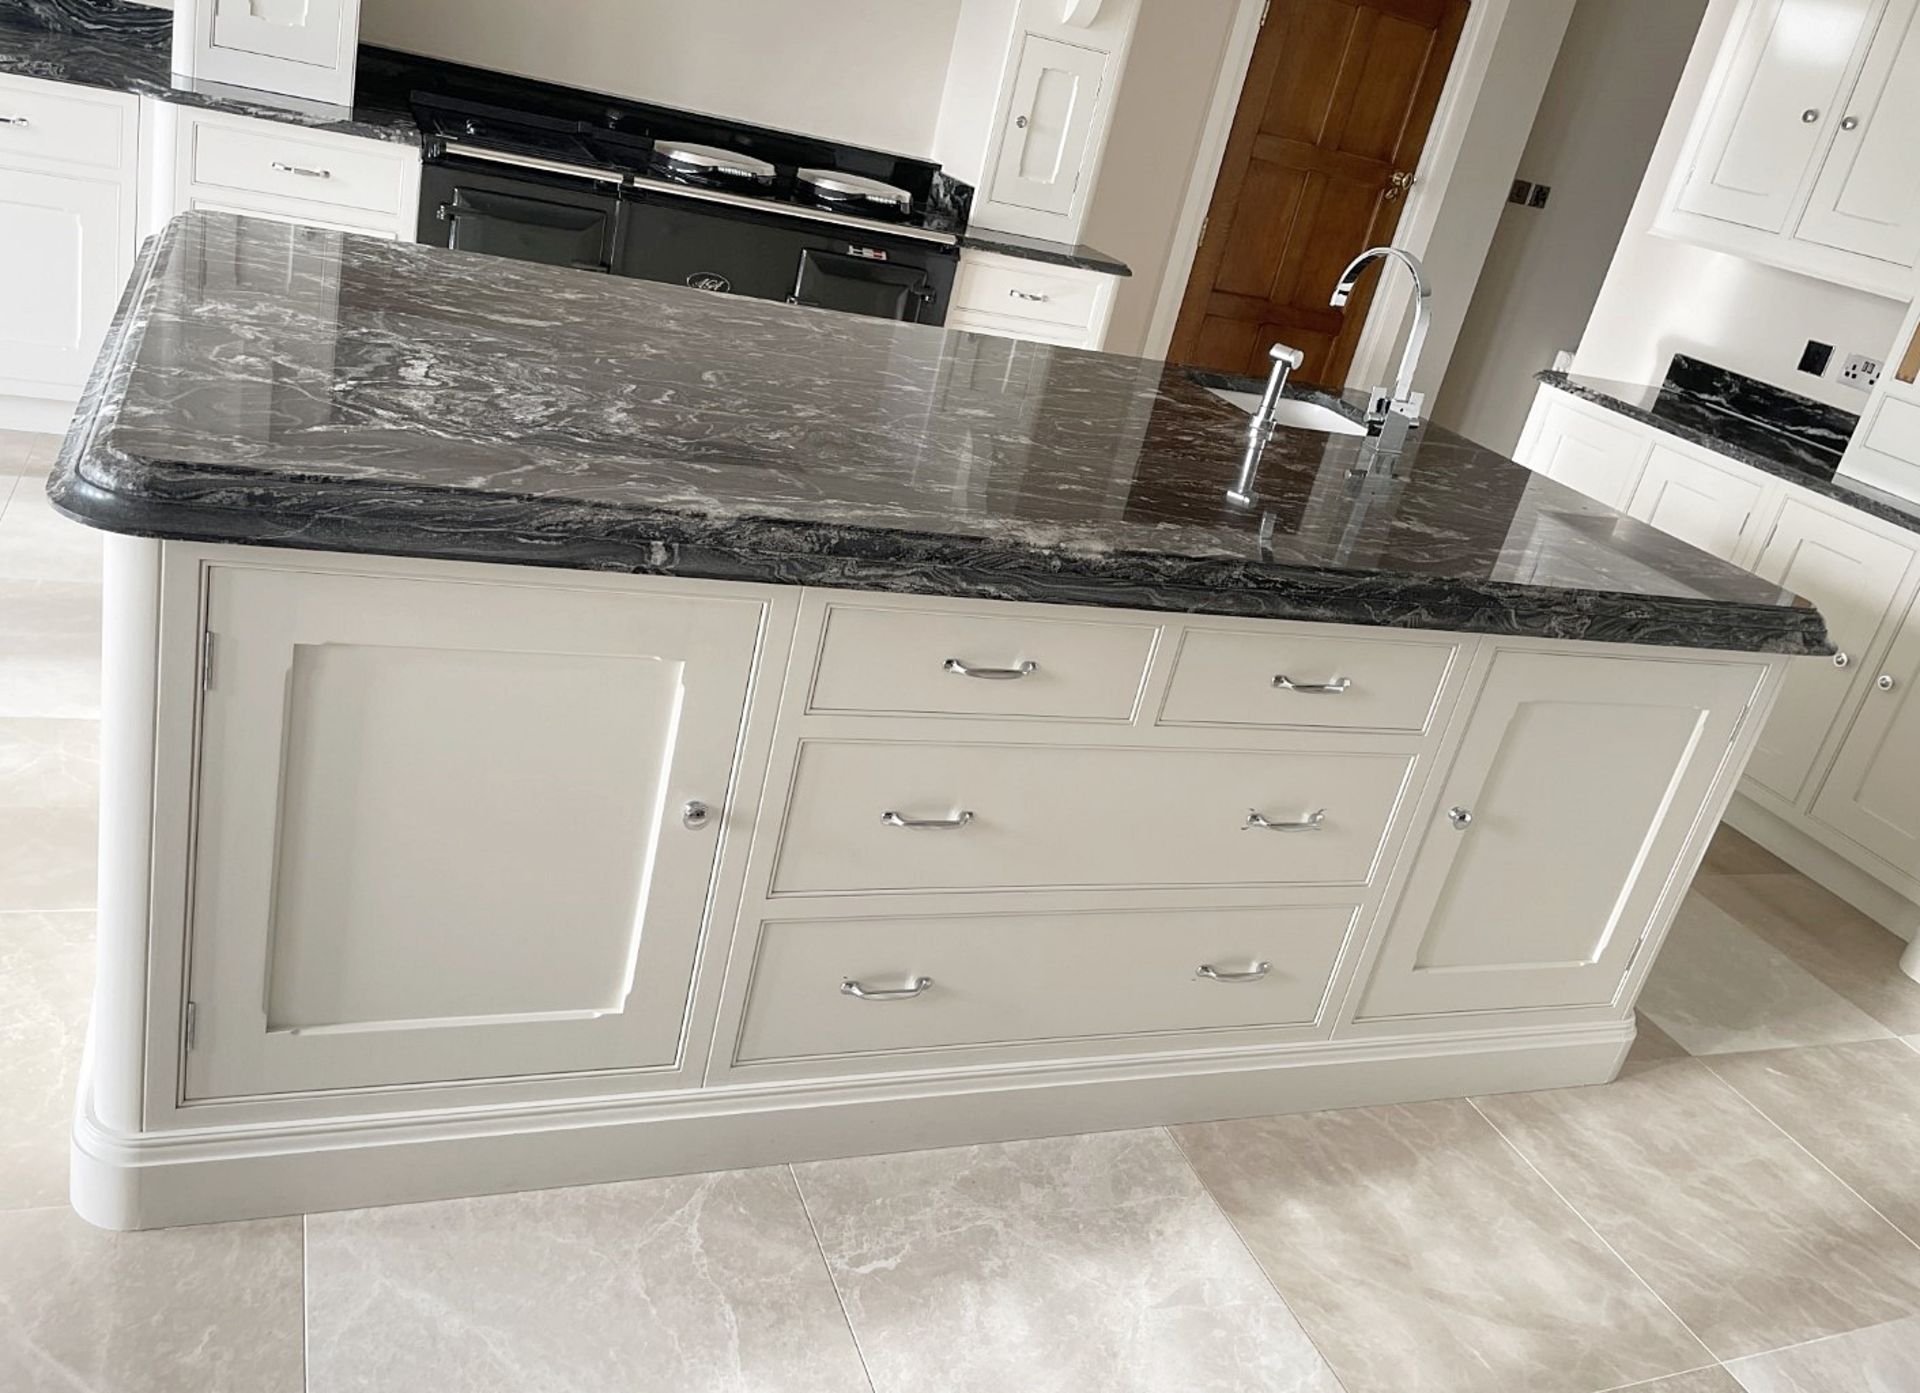 1 x Bespoke Handcrafted Shaker-style Fitted Kitchen Marble Surfaces, Island & Miele Appliances - Image 83 of 221